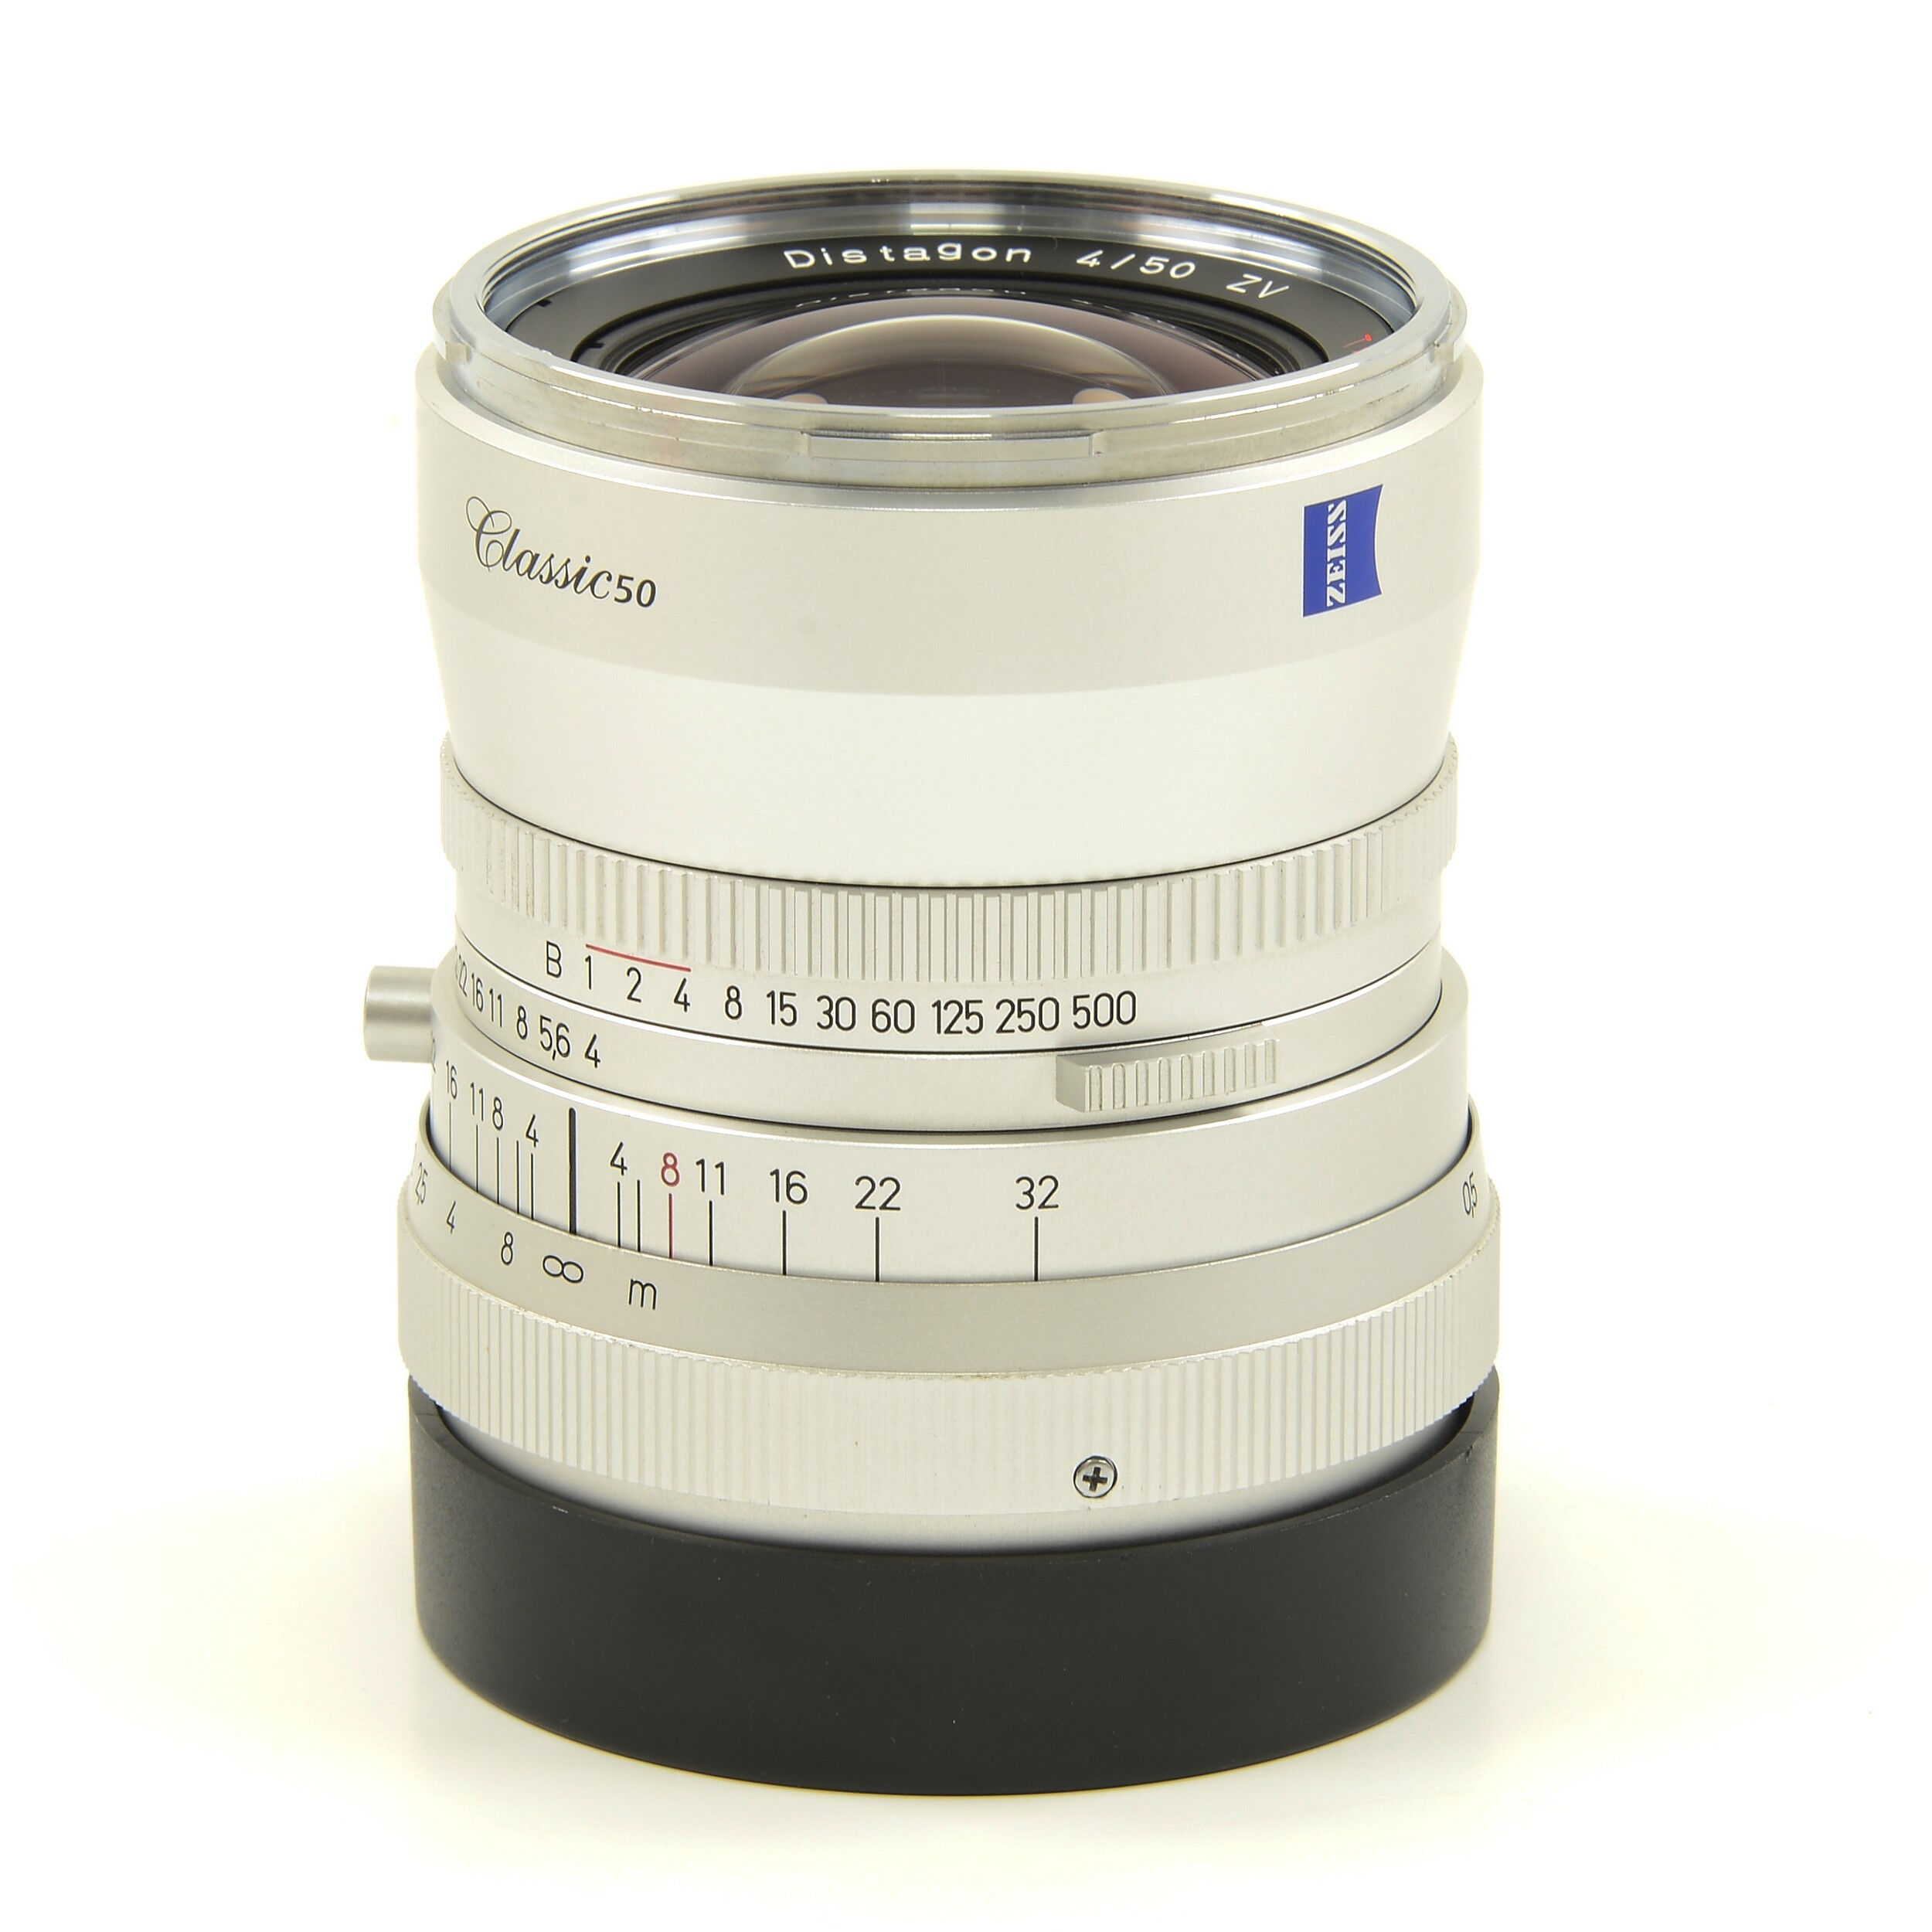 CARL ZEISS 50MM F4 DISTAGON ZV CLASSIC EDITION PROTOTYPE FOR HASSELBLAD V SYSTEM